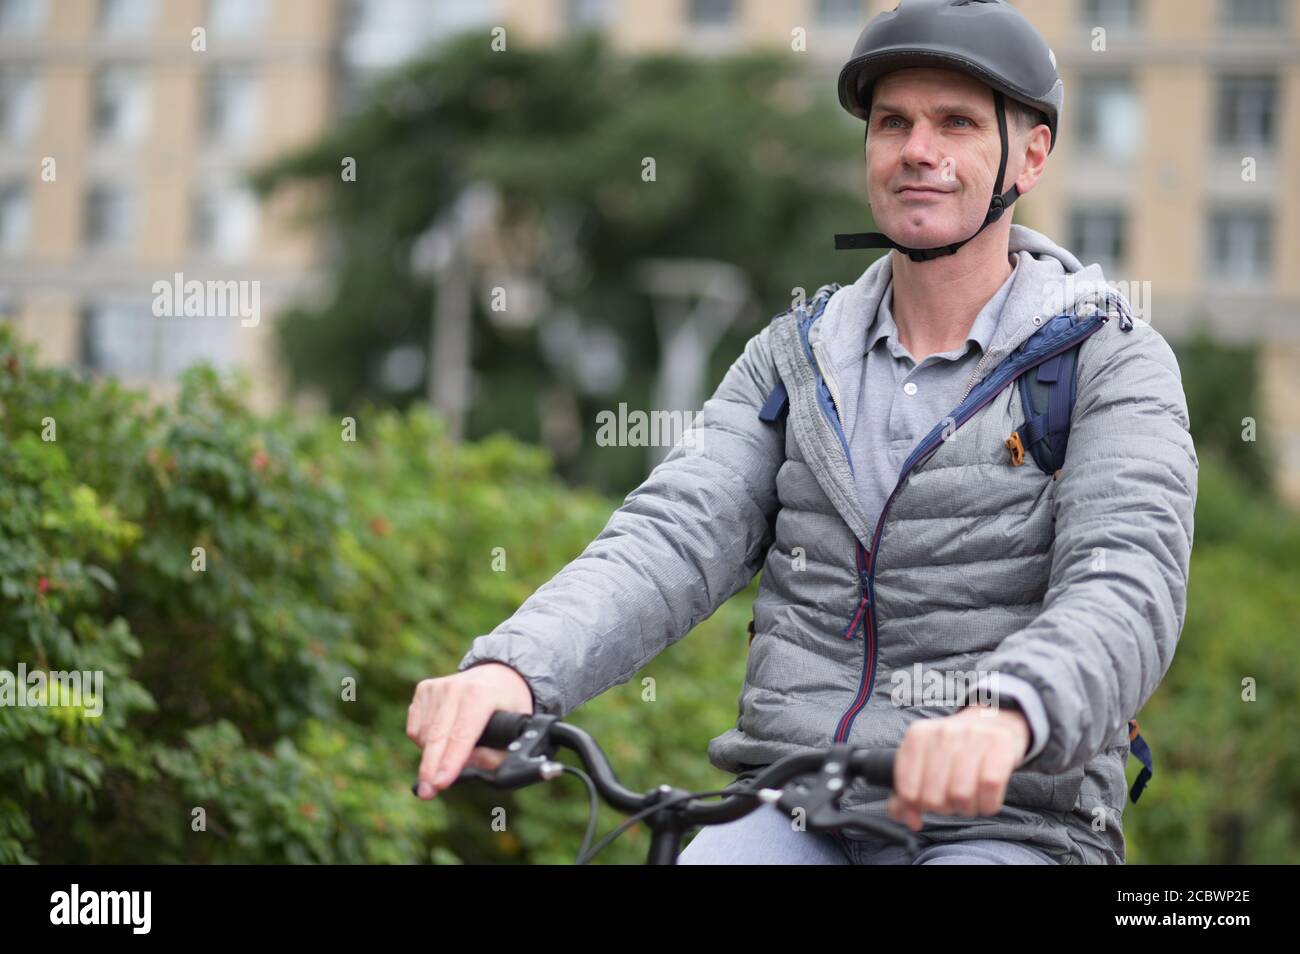 Mature Caucasian man in a bicycle helmet on his bike in a city Stock Photo